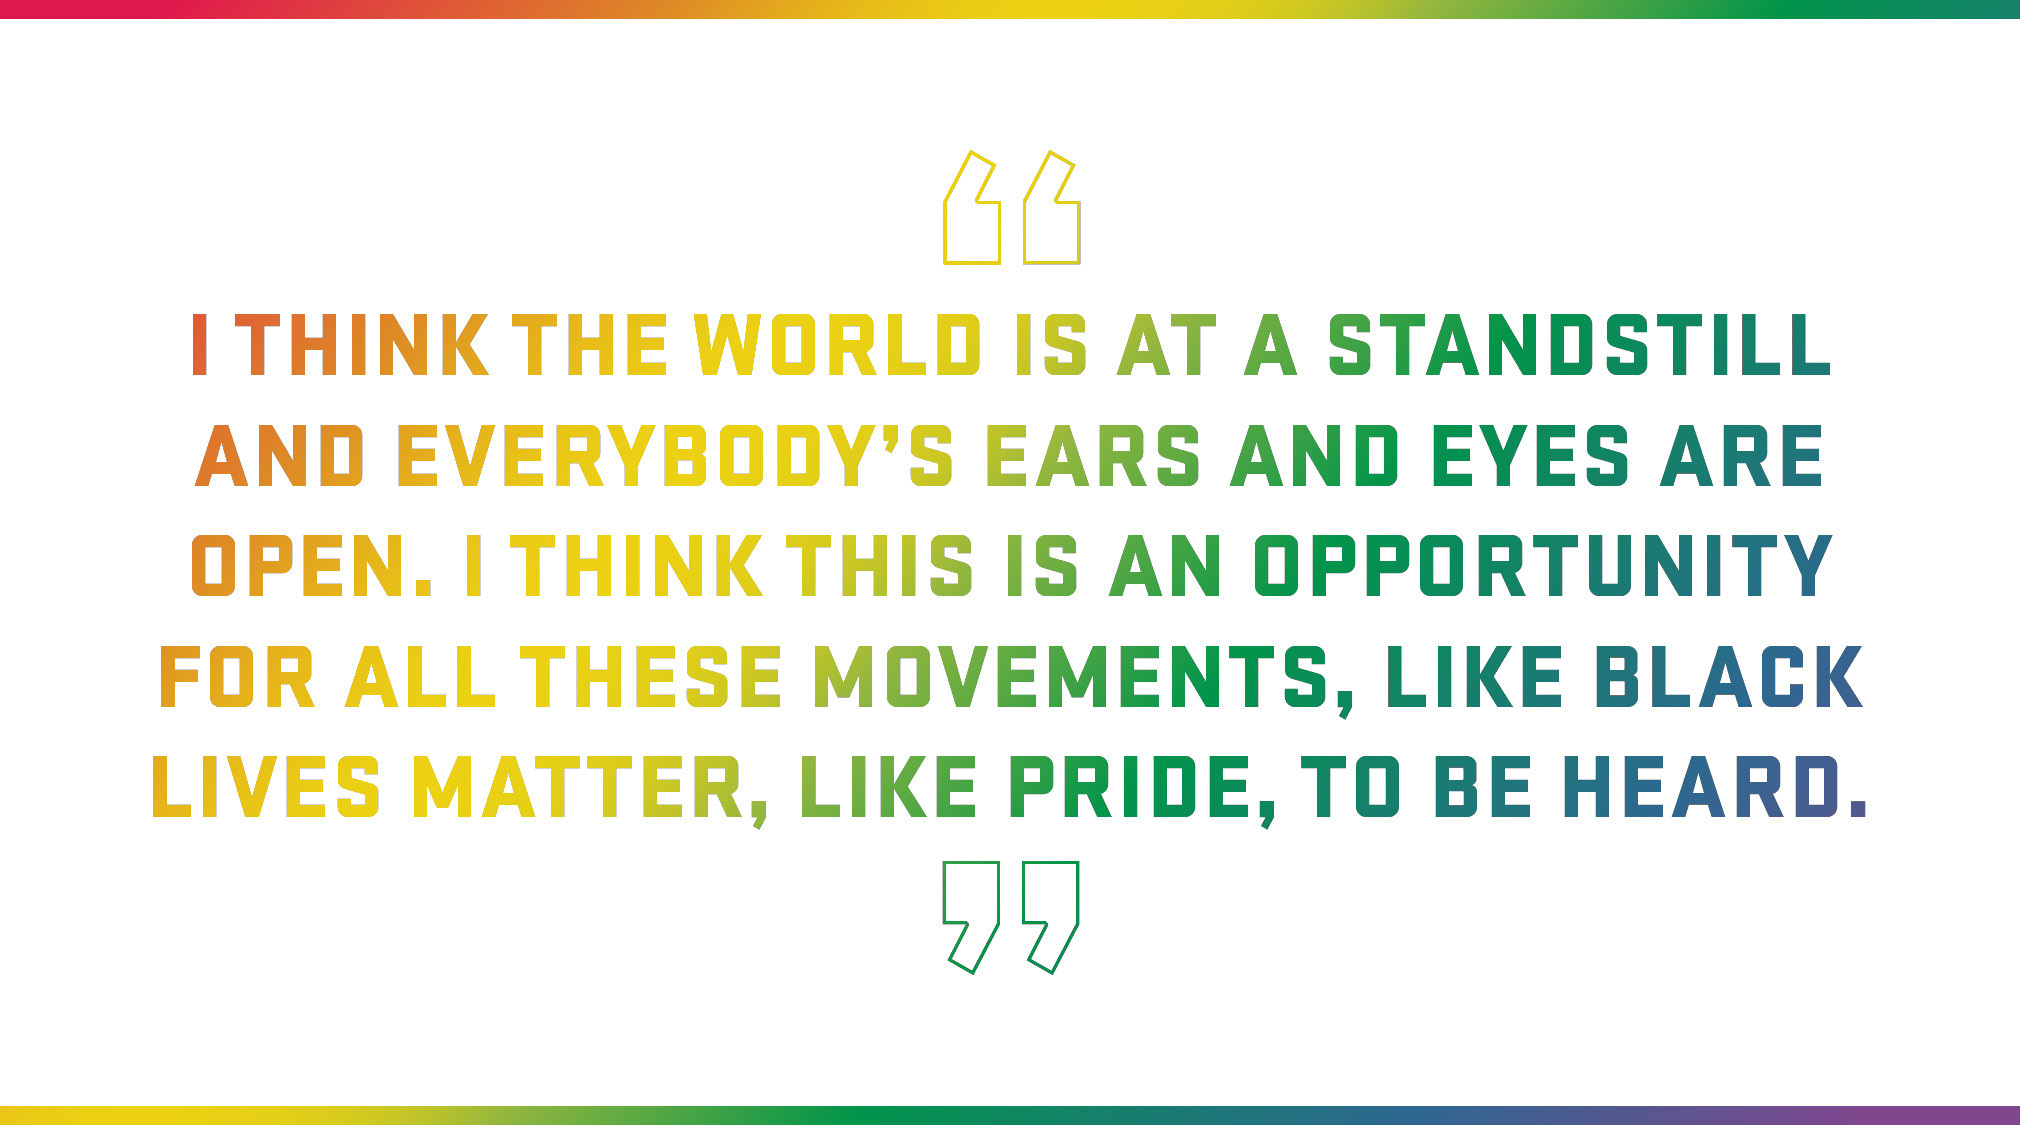 Block Quote: I think the world is at a standstill and everybody’s ears and eyes are open. I think this is an opportunity for all these movements, like Black Lives Matter, like Pride, to be heard. 